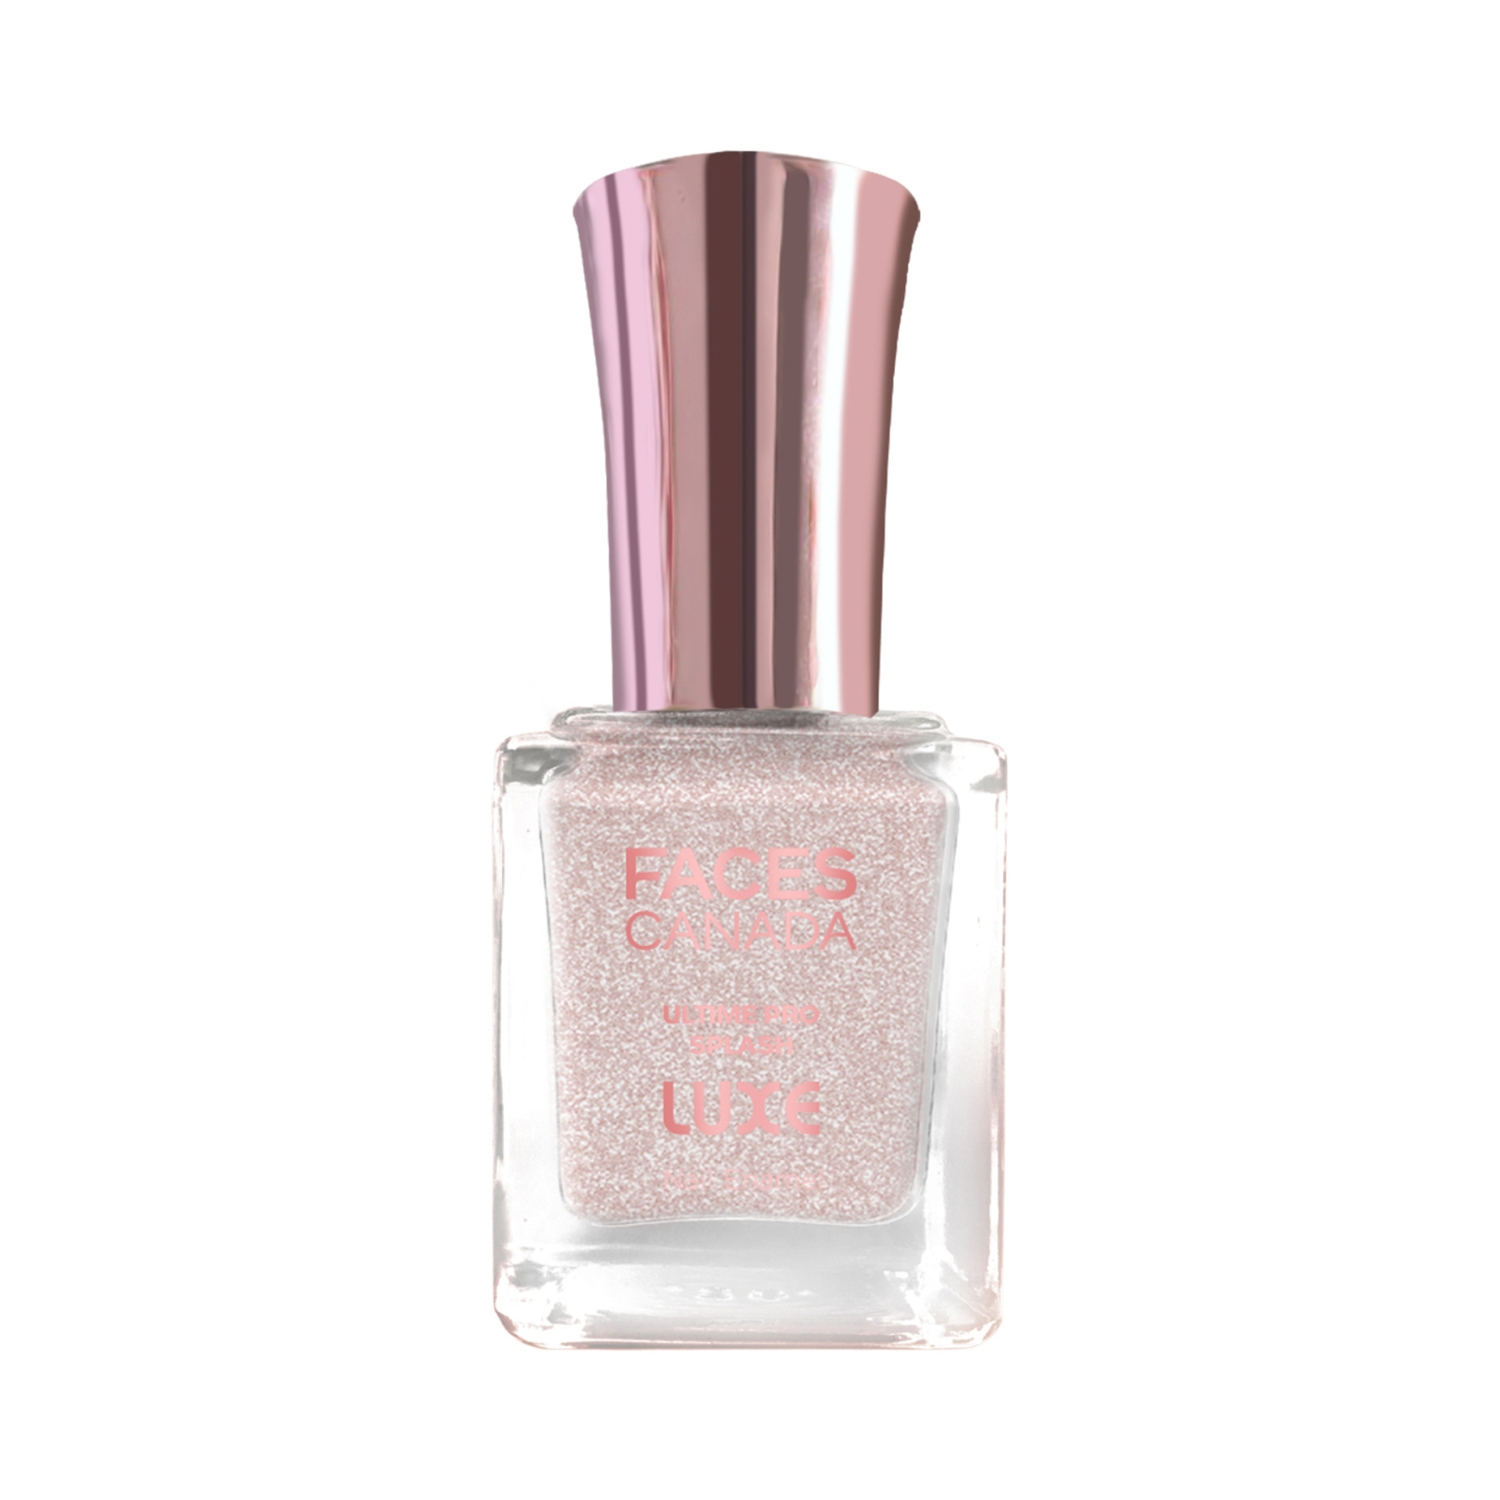 Faces Canada | Faces Canada Ultime Pro Splash Luxe Nail Enamel - L19 Rose Gold (12ml)